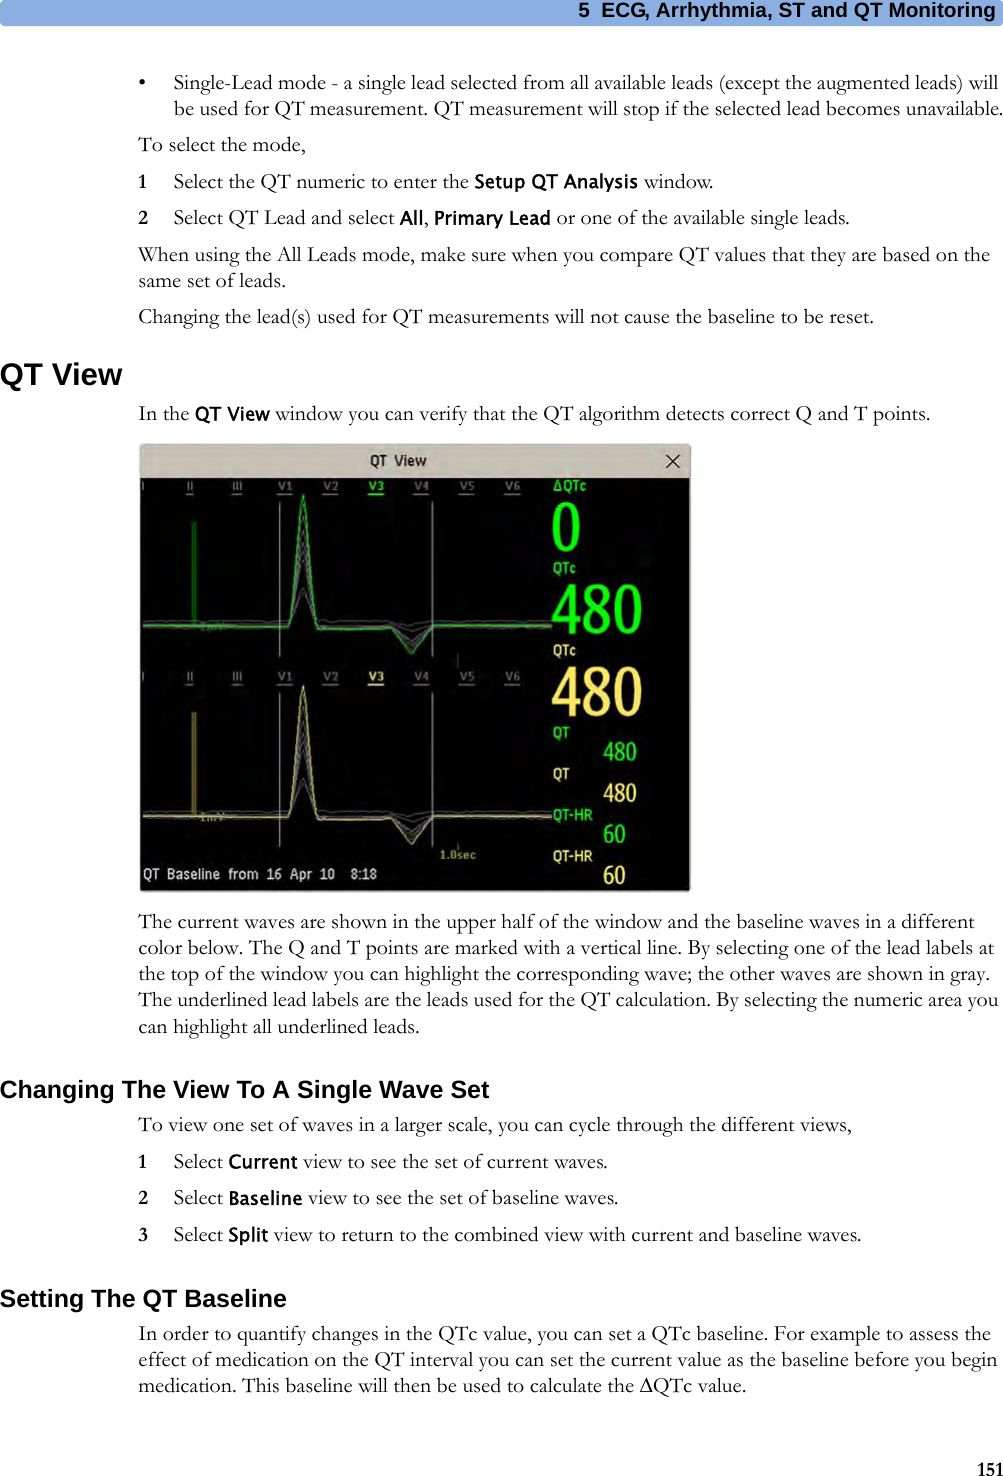 5 ECG, Arrhythmia, ST and QT Monitoring151• Single-Lead mode - a single lead selected from all available leads (except the augmented leads) will be used for QT measurement. QT measurement will stop if the selected lead becomes unavailable.To select the mode,1Select the QT numeric to enter the Setup QT Analysis window.2Select QT Lead and select All, Primary Lead or one of the available single leads.When using the All Leads mode, make sure when you compare QT values that they are based on the same set of leads.Changing the lead(s) used for QT measurements will not cause the baseline to be reset.QT ViewIn the QT View window you can verify that the QT algorithm detects correct Q and T points.The current waves are shown in the upper half of the window and the baseline waves in a different color below. The Q and T points are marked with a vertical line. By selecting one of the lead labels at the top of the window you can highlight the corresponding wave; the other waves are shown in gray. The underlined lead labels are the leads used for the QT calculation. By selecting the numeric area you can highlight all underlined leads.Changing The View To A Single Wave SetTo view one set of waves in a larger scale, you can cycle through the different views,1Select Current view to see the set of current waves.2Select Baseline view to see the set of baseline waves.3Select Split view to return to the combined view with current and baseline waves.Setting The QT BaselineIn order to quantify changes in the QTc value, you can set a QTc baseline. For example to assess the effect of medication on the QT interval you can set the current value as the baseline before you begin medication. This baseline will then be used to calculate the ΔQTc value.